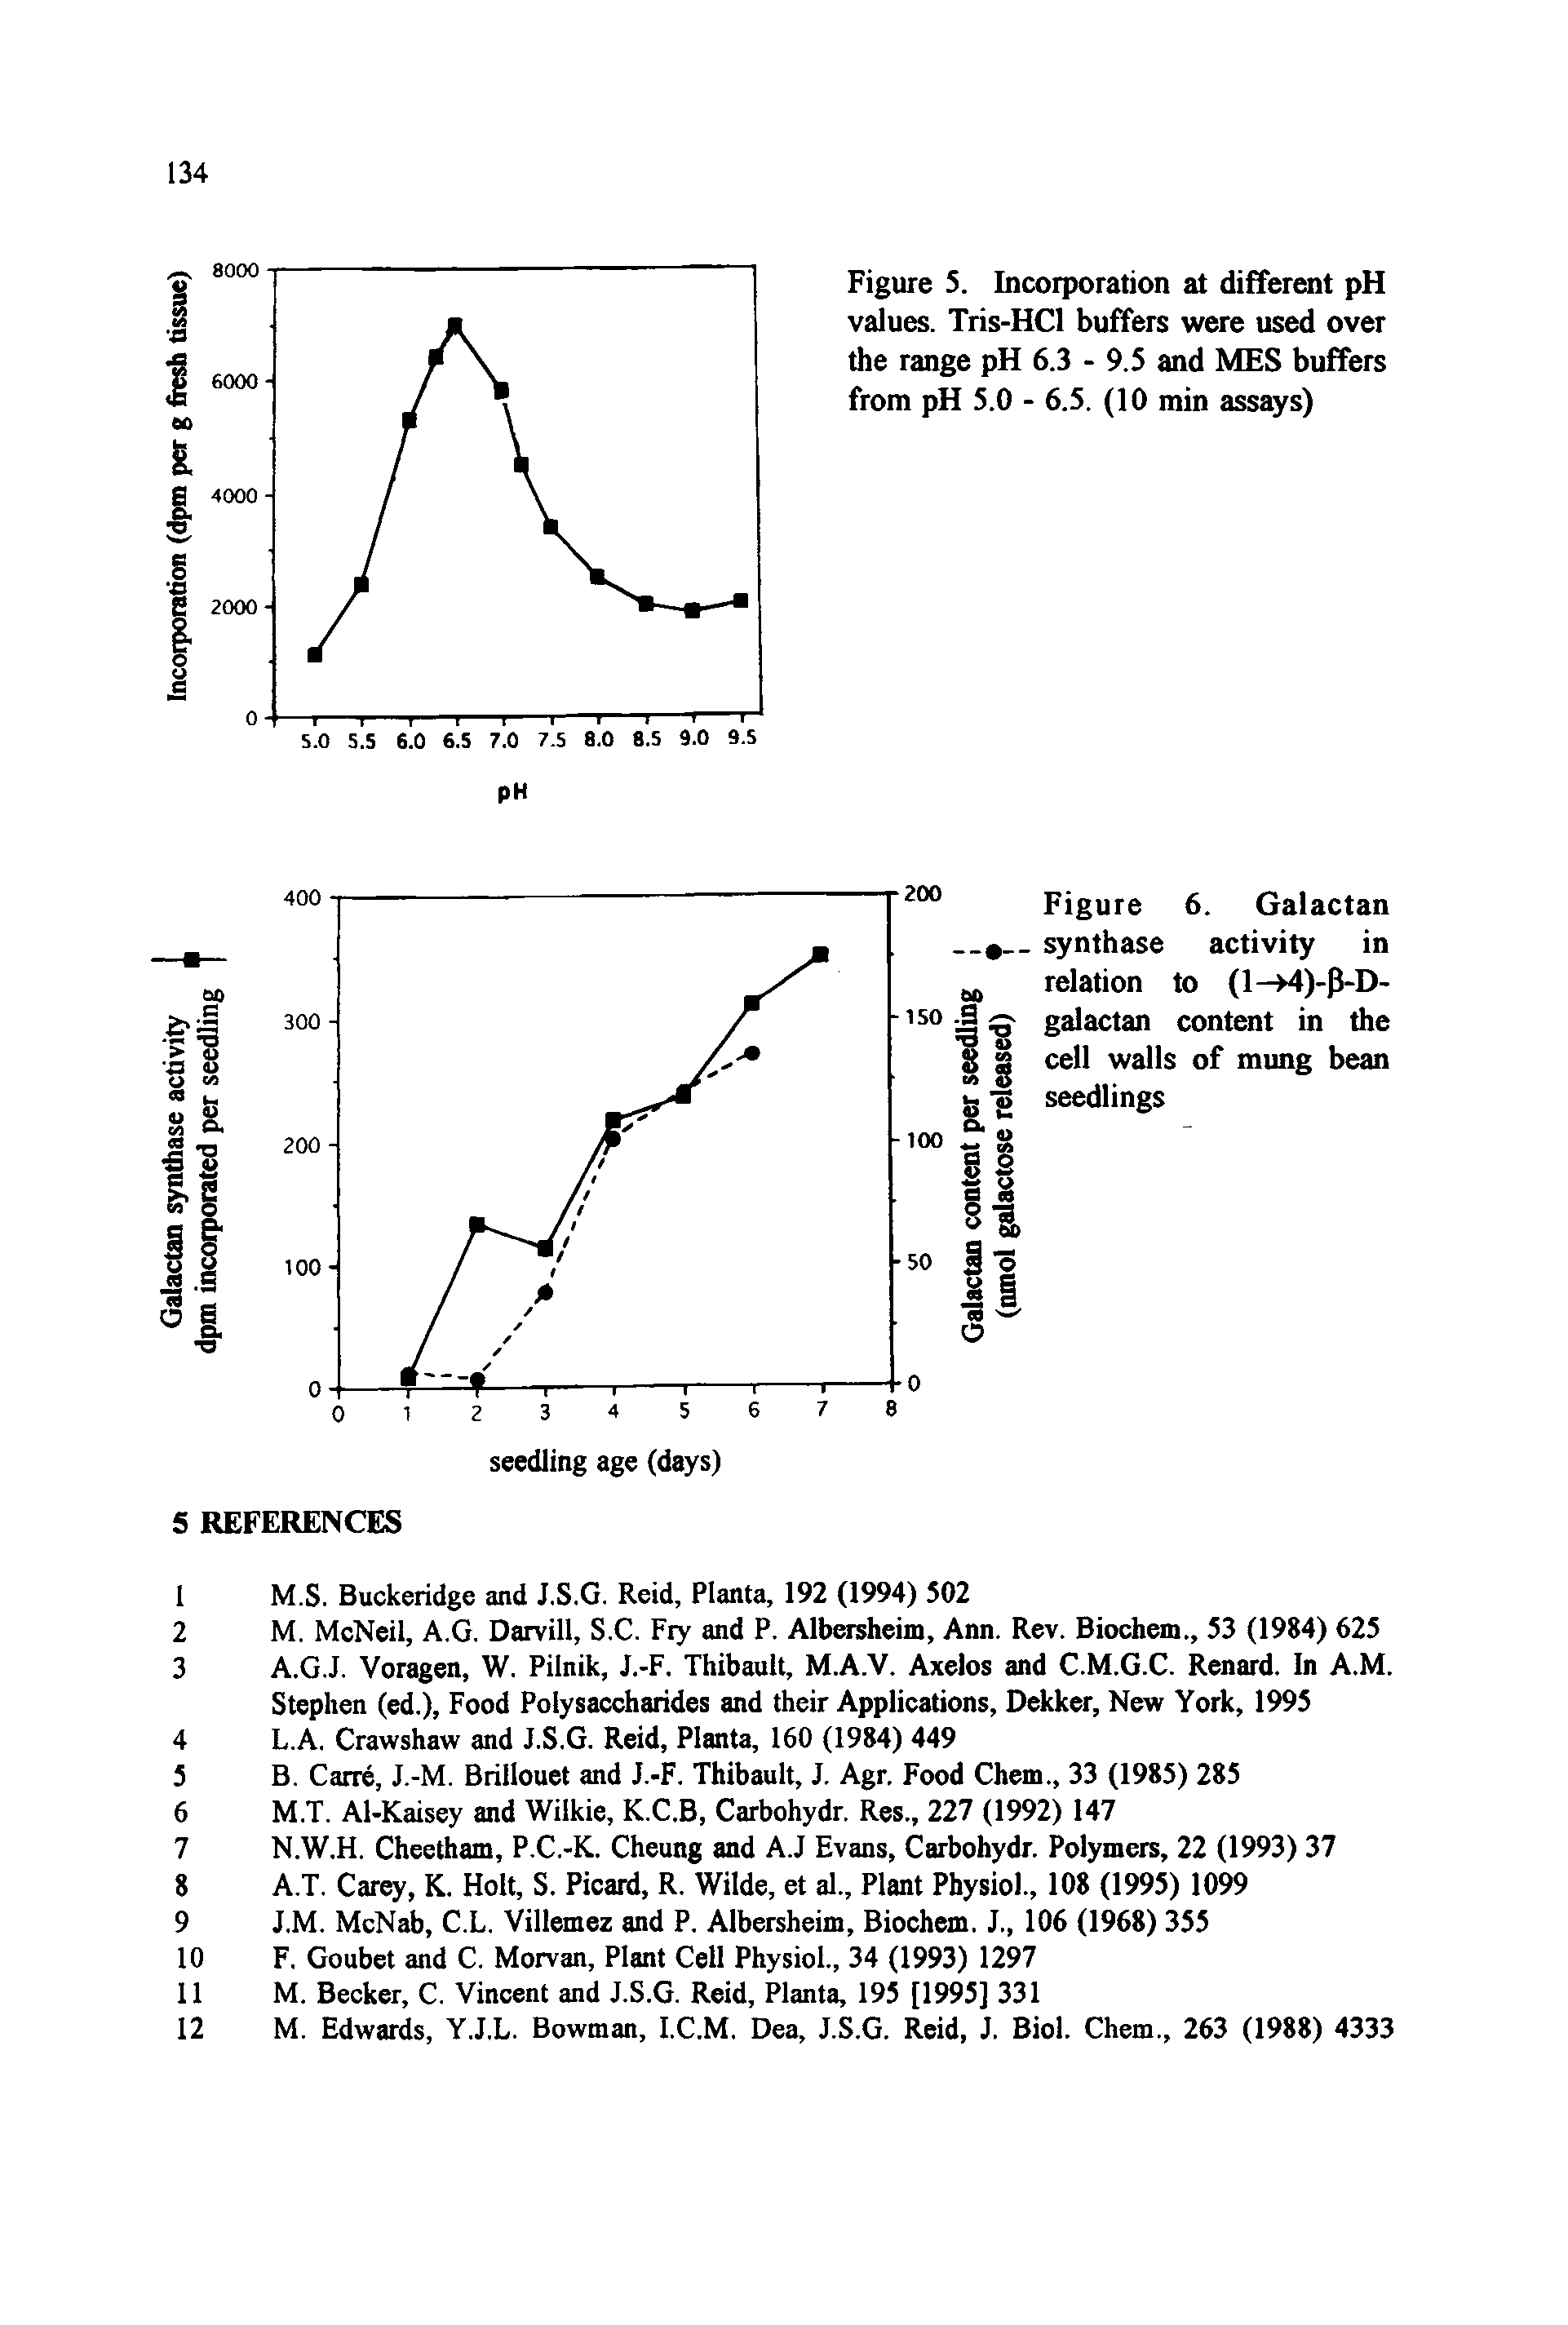 Figure 5. Incorporation at different pH values. Tris-HCl buffers were used over the range pH 6.3 - 9.5 and MES buffers from pH 5.0 - 6.5. (10 min assays)...